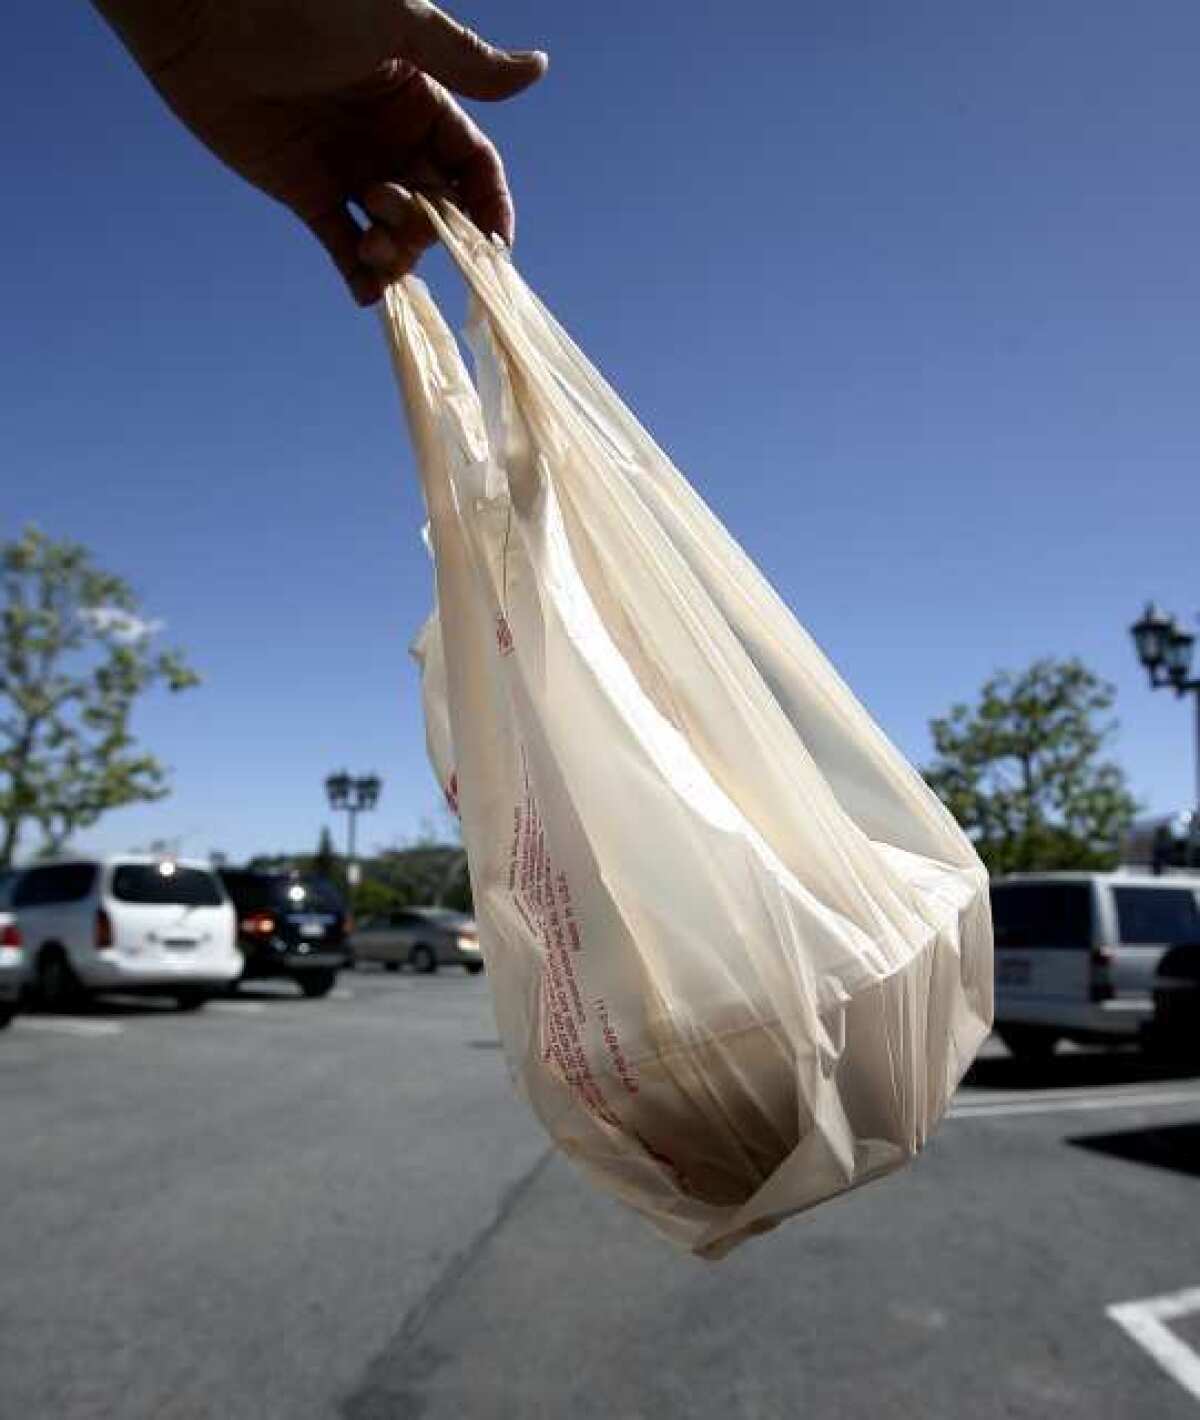 Plastic bags at Ralph's in La Canada Flintridge on Tuesday, April 16, 2013. The city council considered a ban on plastic bags, however, three of the five City Council members showed opposition on Monday, May 6, 2013, to studying an ordinance that would limit or ban single-use plastic bags in the city.